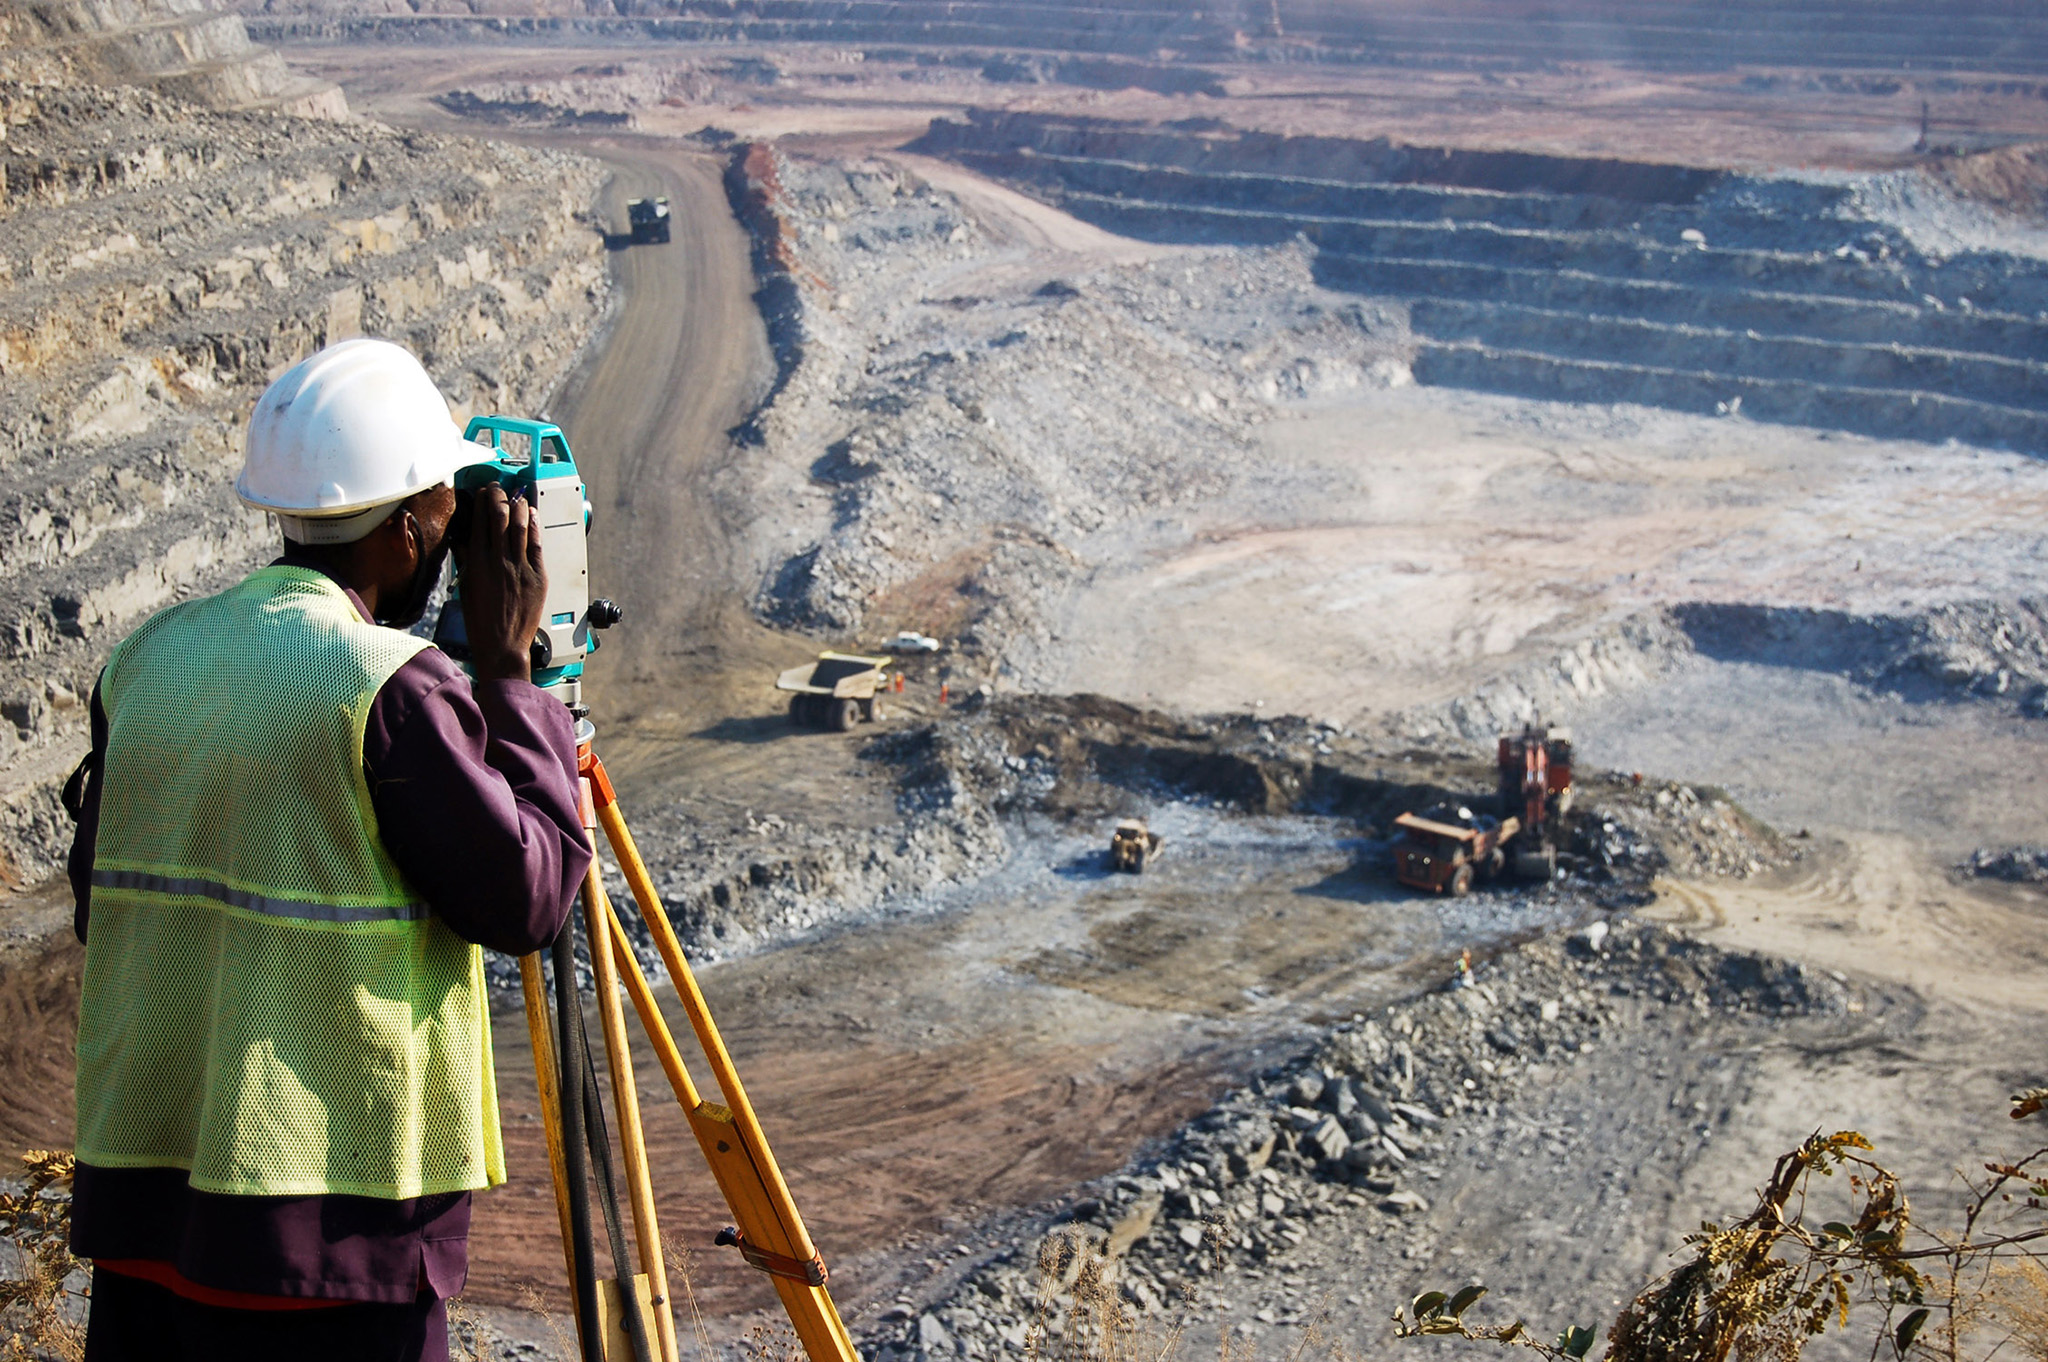 A locally employed surveyor at an open-pit copper mine in Zambia peers through a theodolite to record the daily changes in the mine and to help guide mining activities. (Photo by mabus13/iStock)